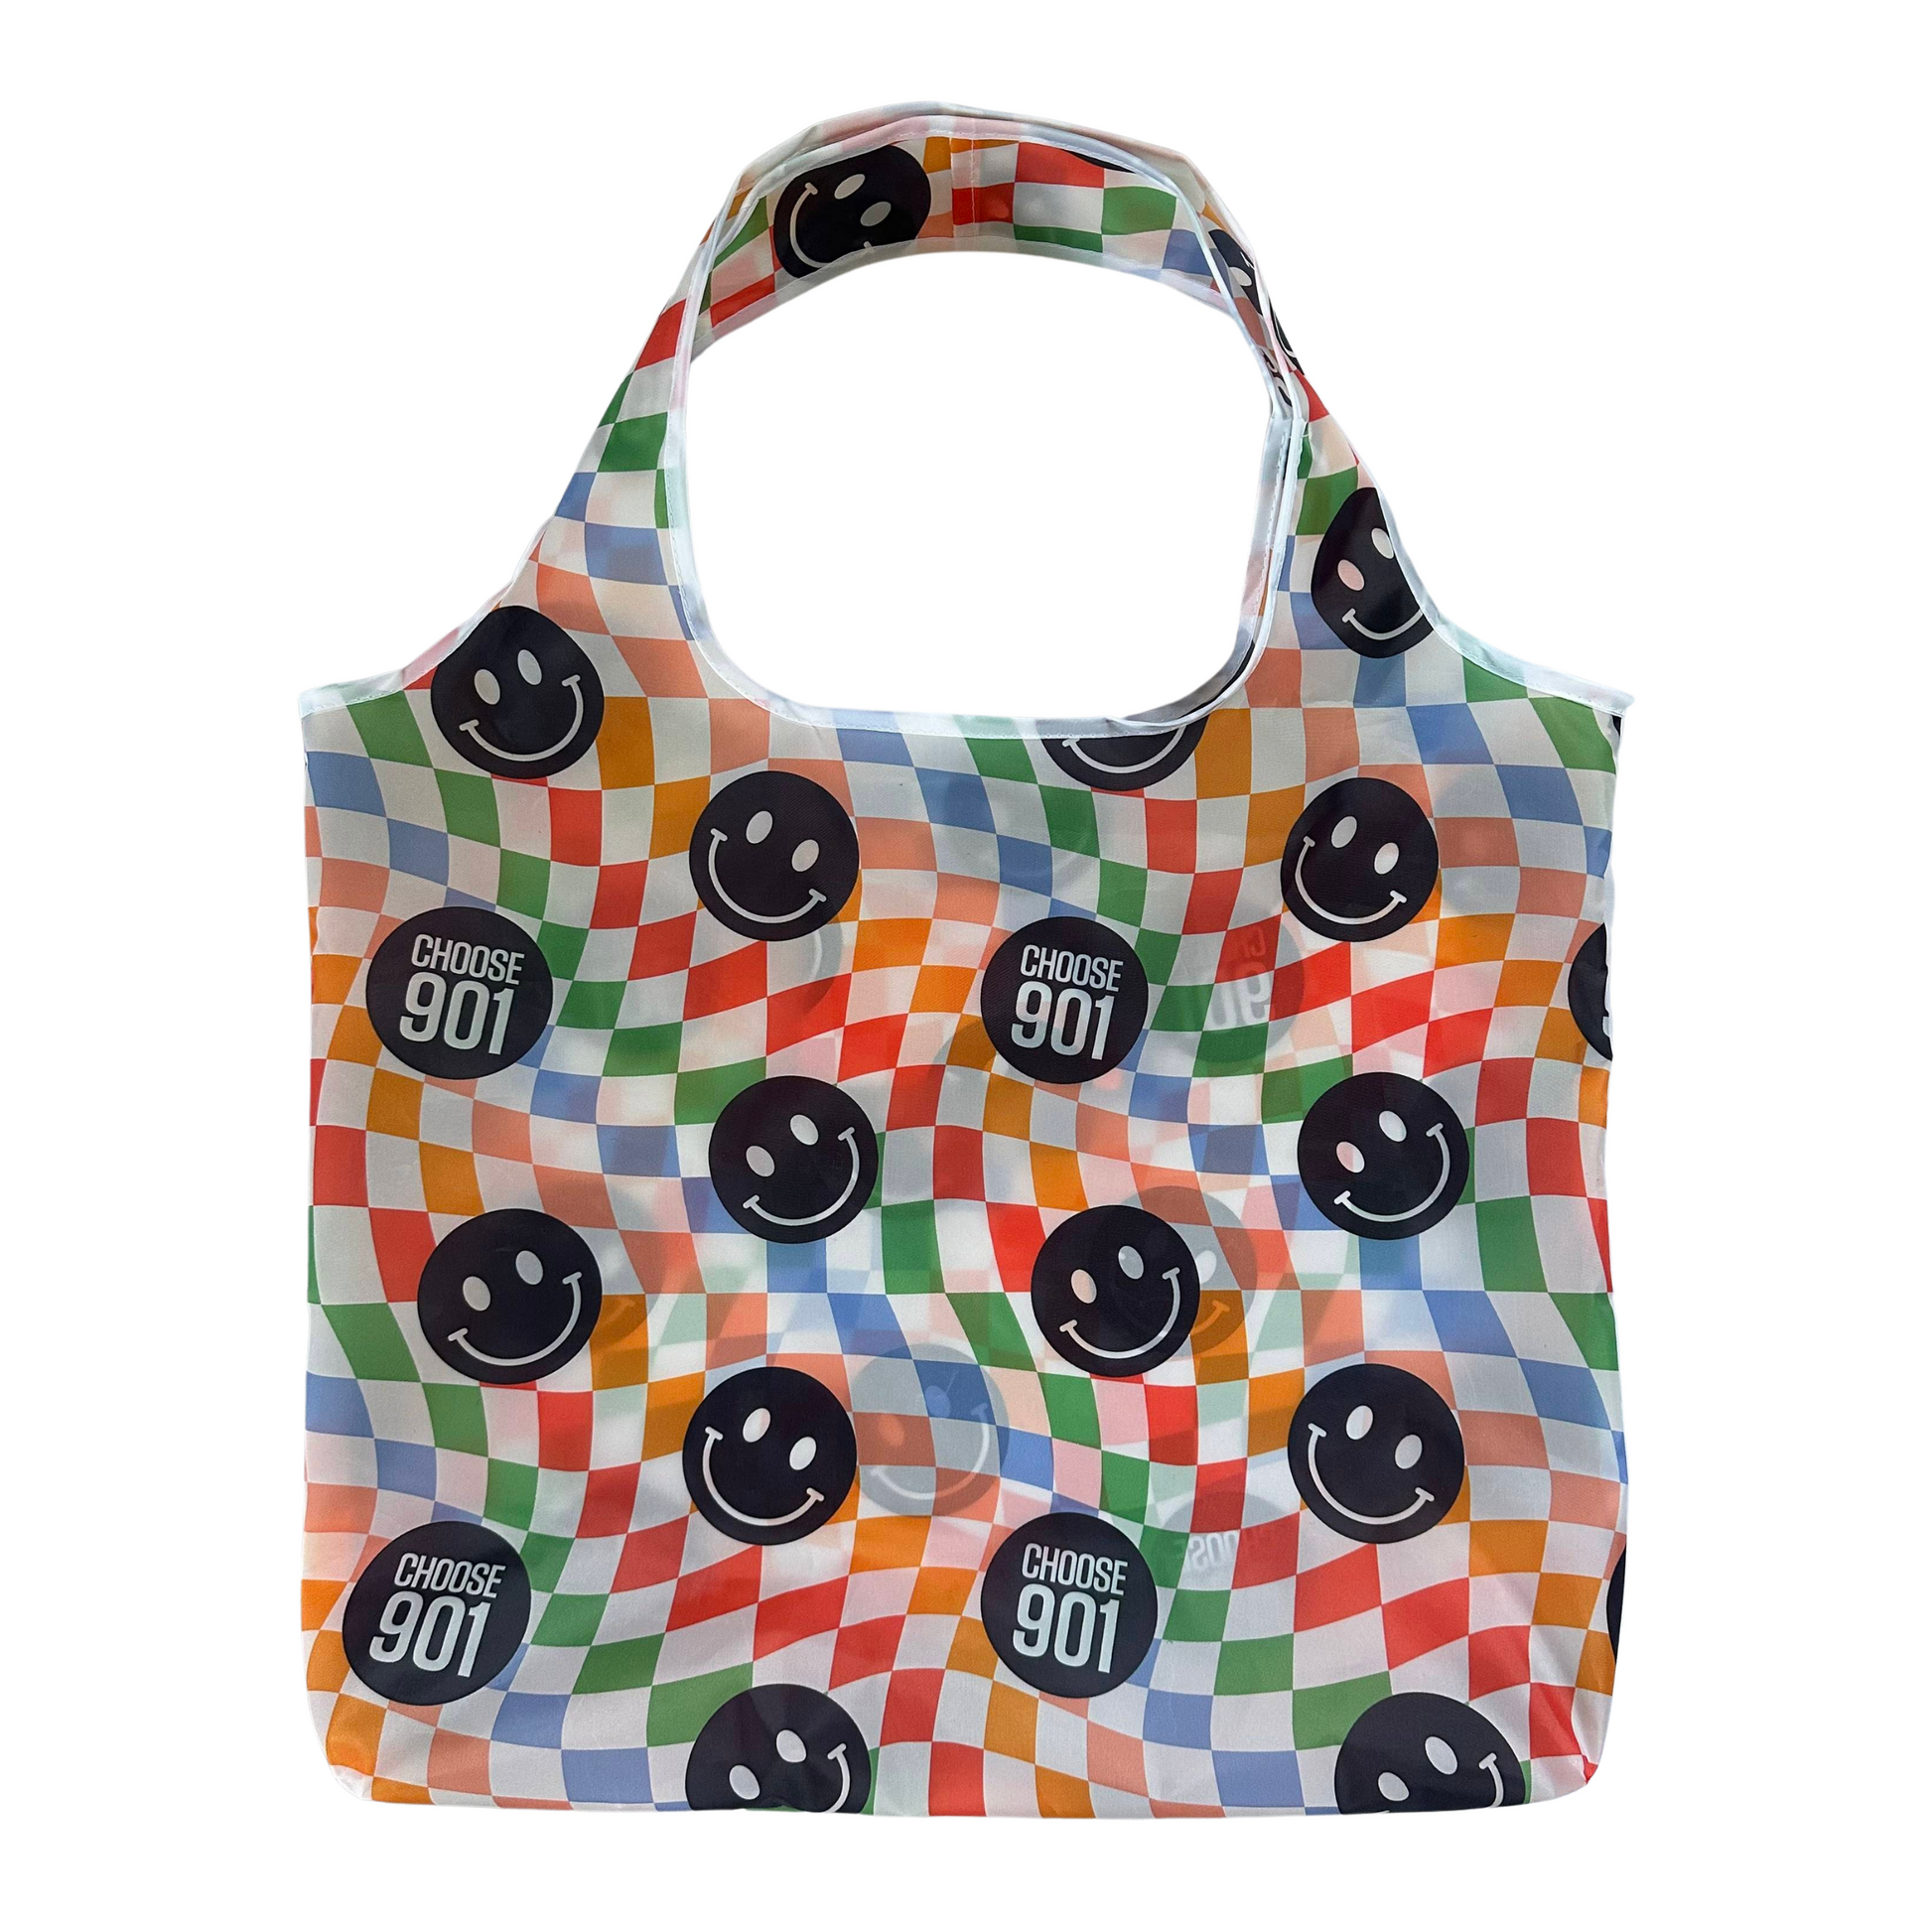 Colorful checkered Smiley Nylon Tote Bag with smiling face pattern and "Choose901 Memphis" text from Choose901 Merch Shop.